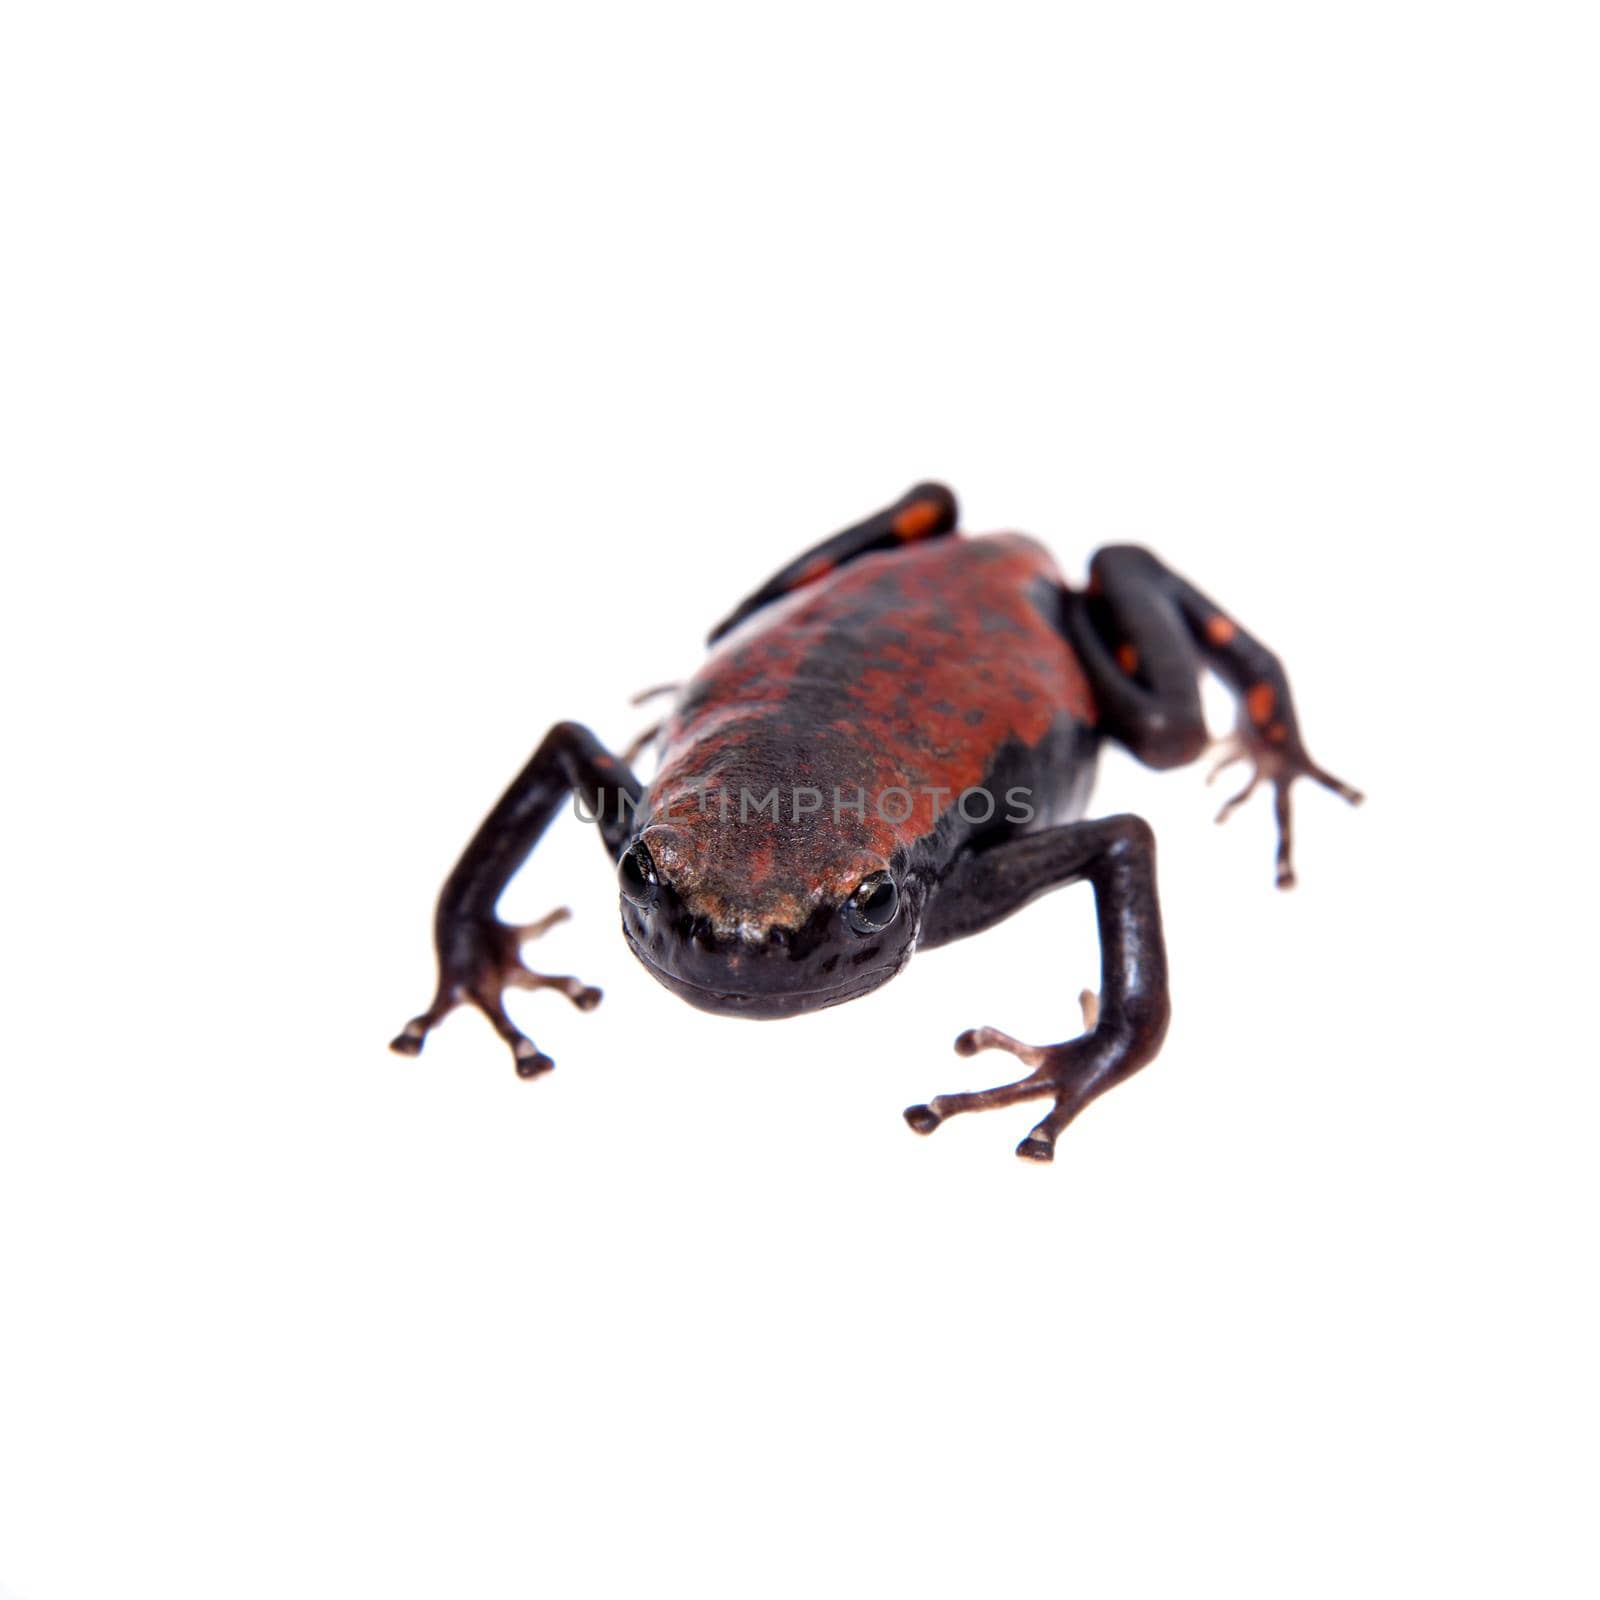 Accra snake-necked frog or West African rubber frog on white by RosaJay